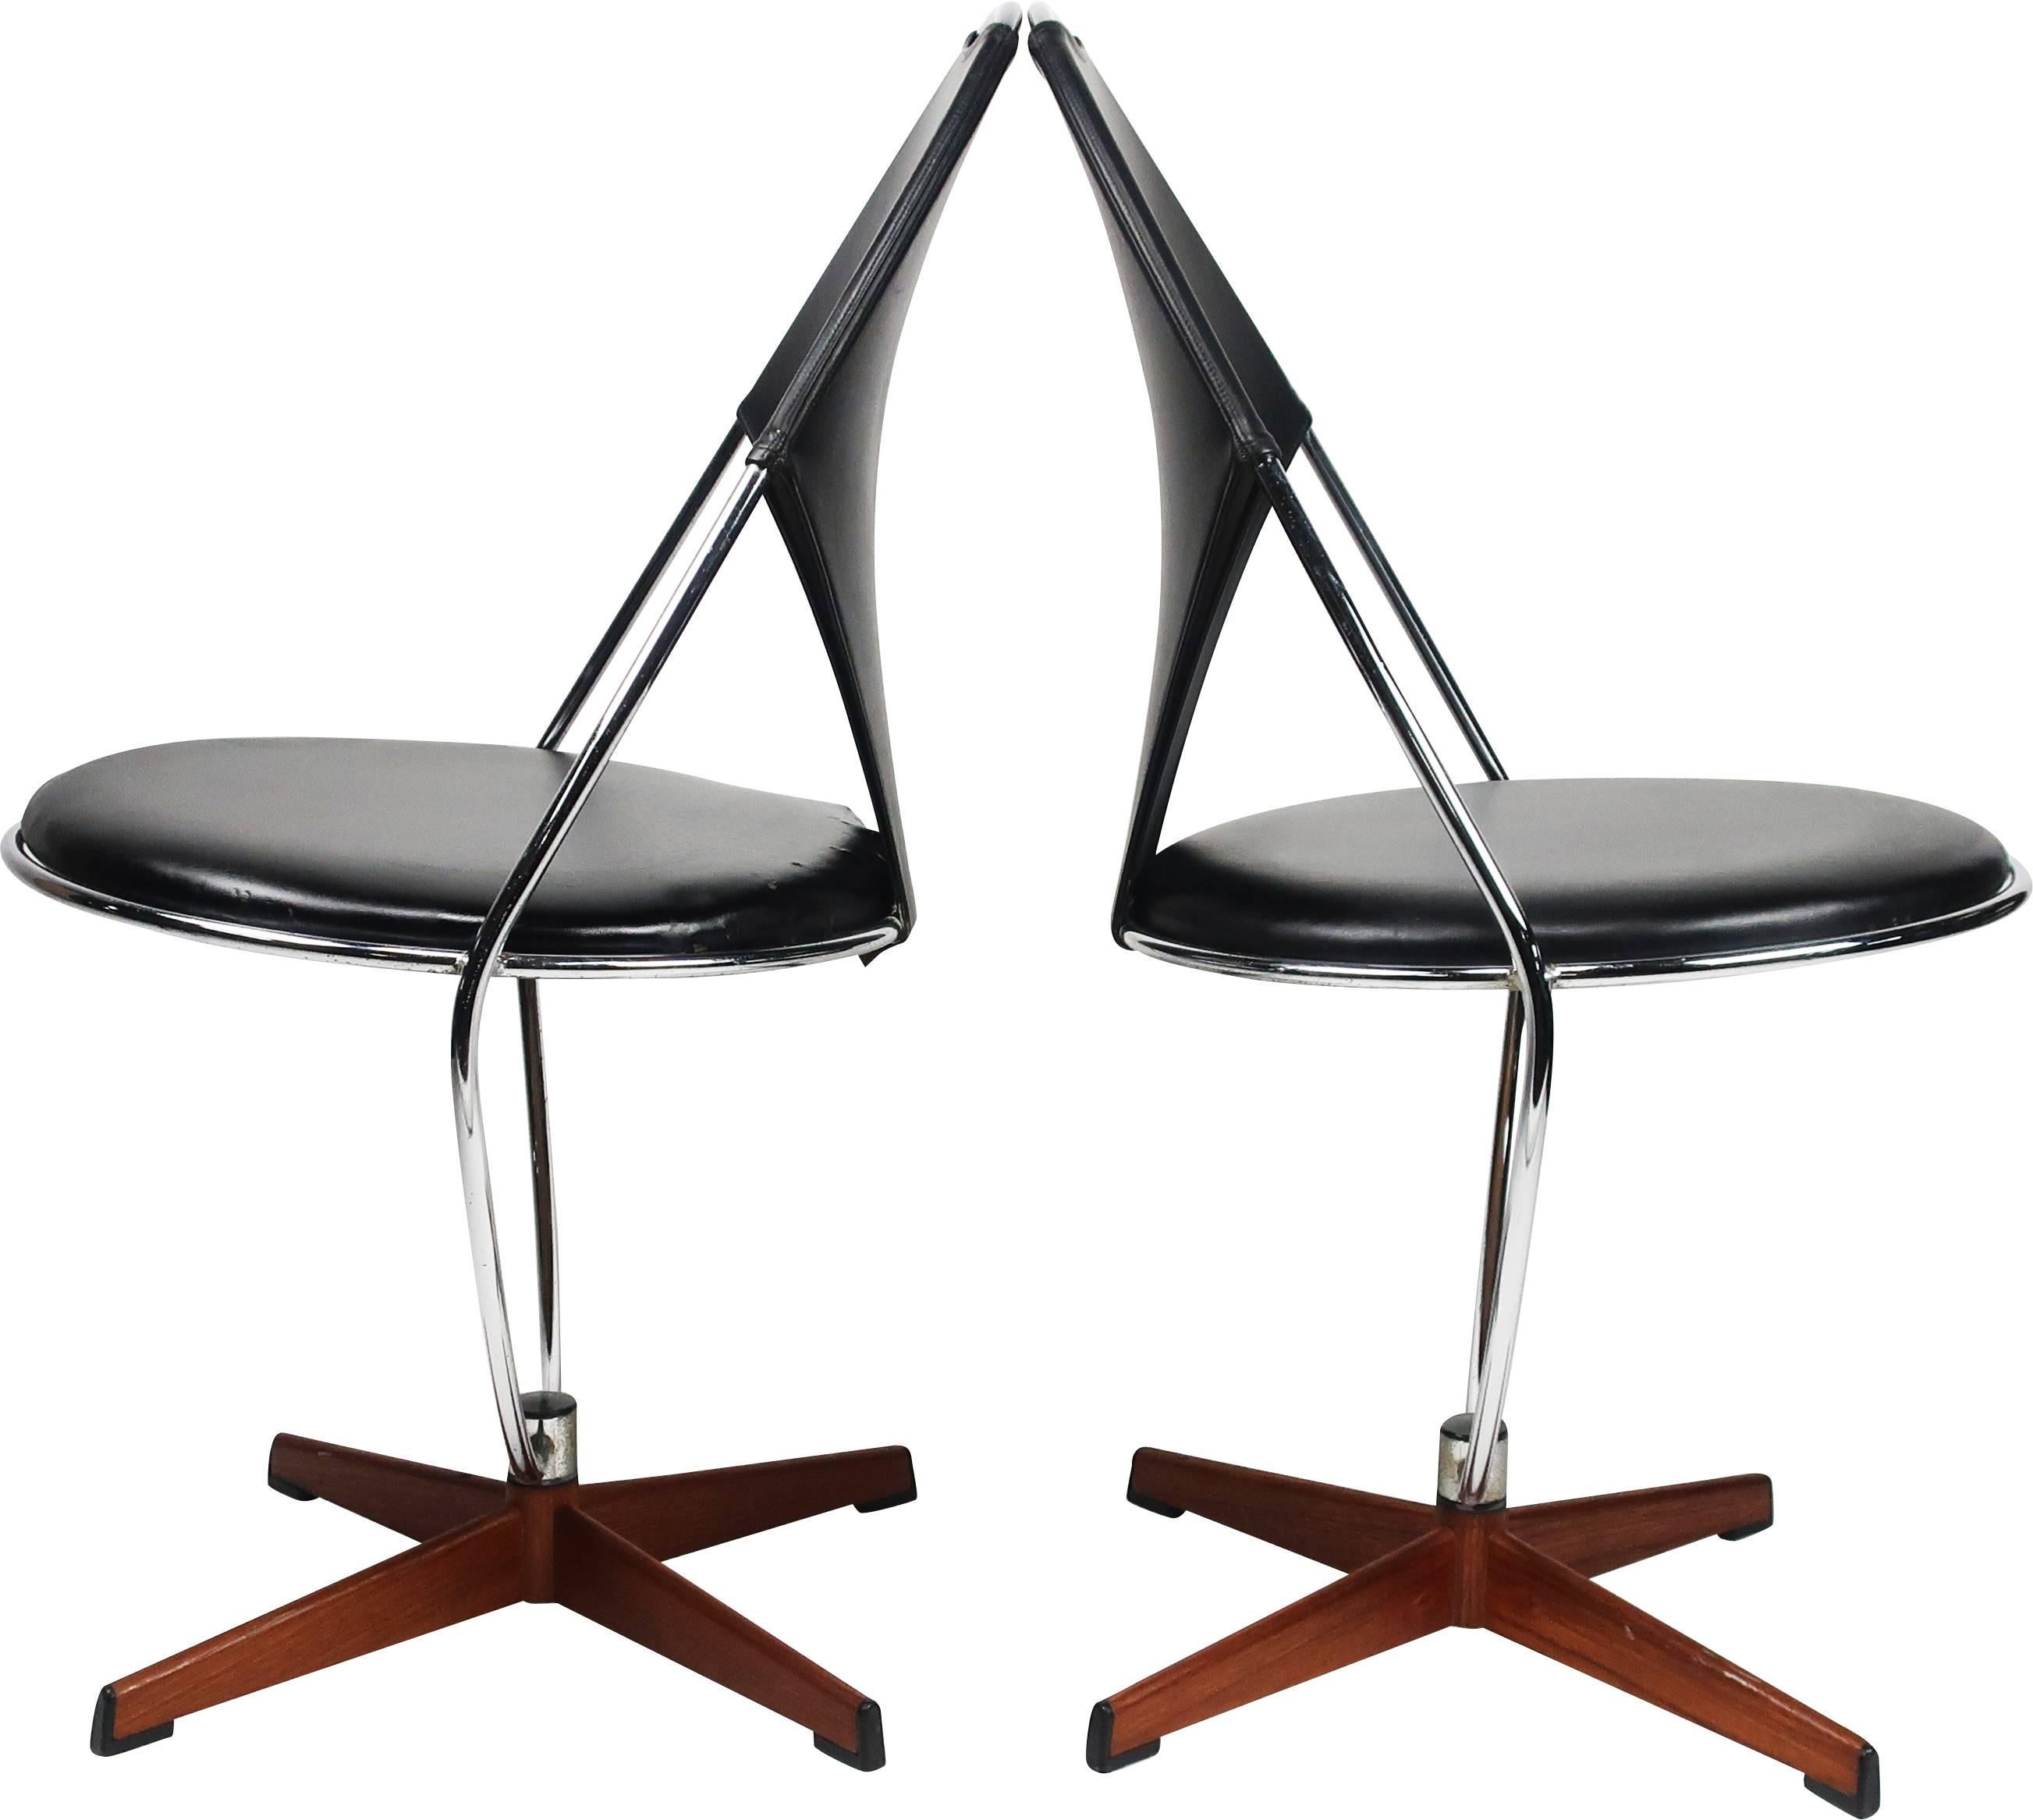 A pair of perfectly Atomic Age Swedish chrome swivel chairs with curved base and seat back and detachable round vinyl cushion seat., Sits on a four legged metal base covered with teak veneer, Designed by Dahlens Dalum in Sweden in the 1950s, these